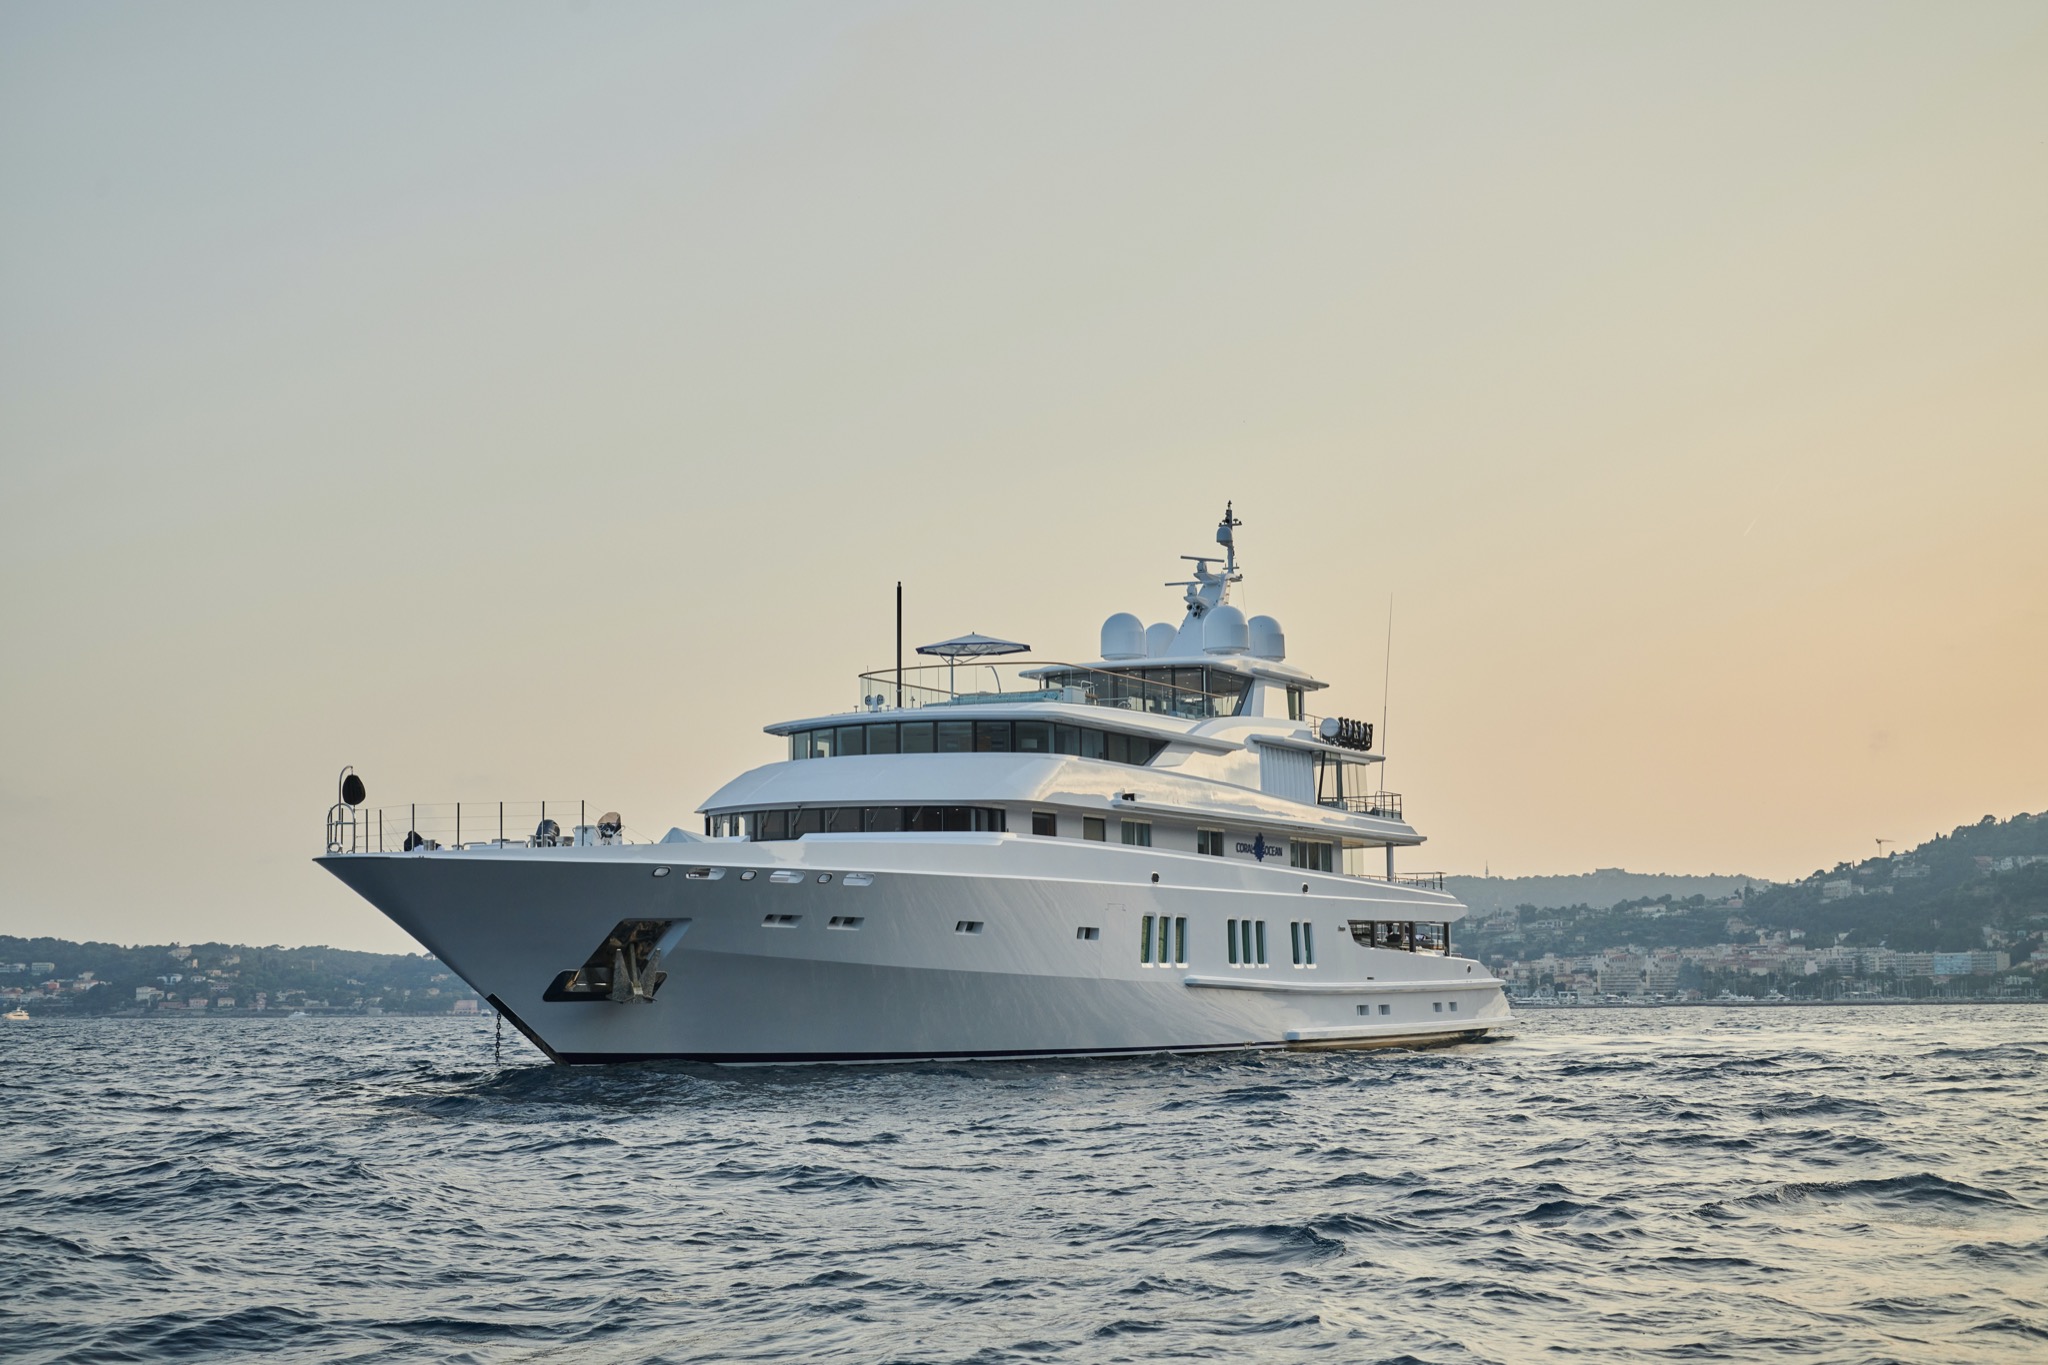 ICONIC SUPERYACHT REBORN & READY TO BE CHARTERED